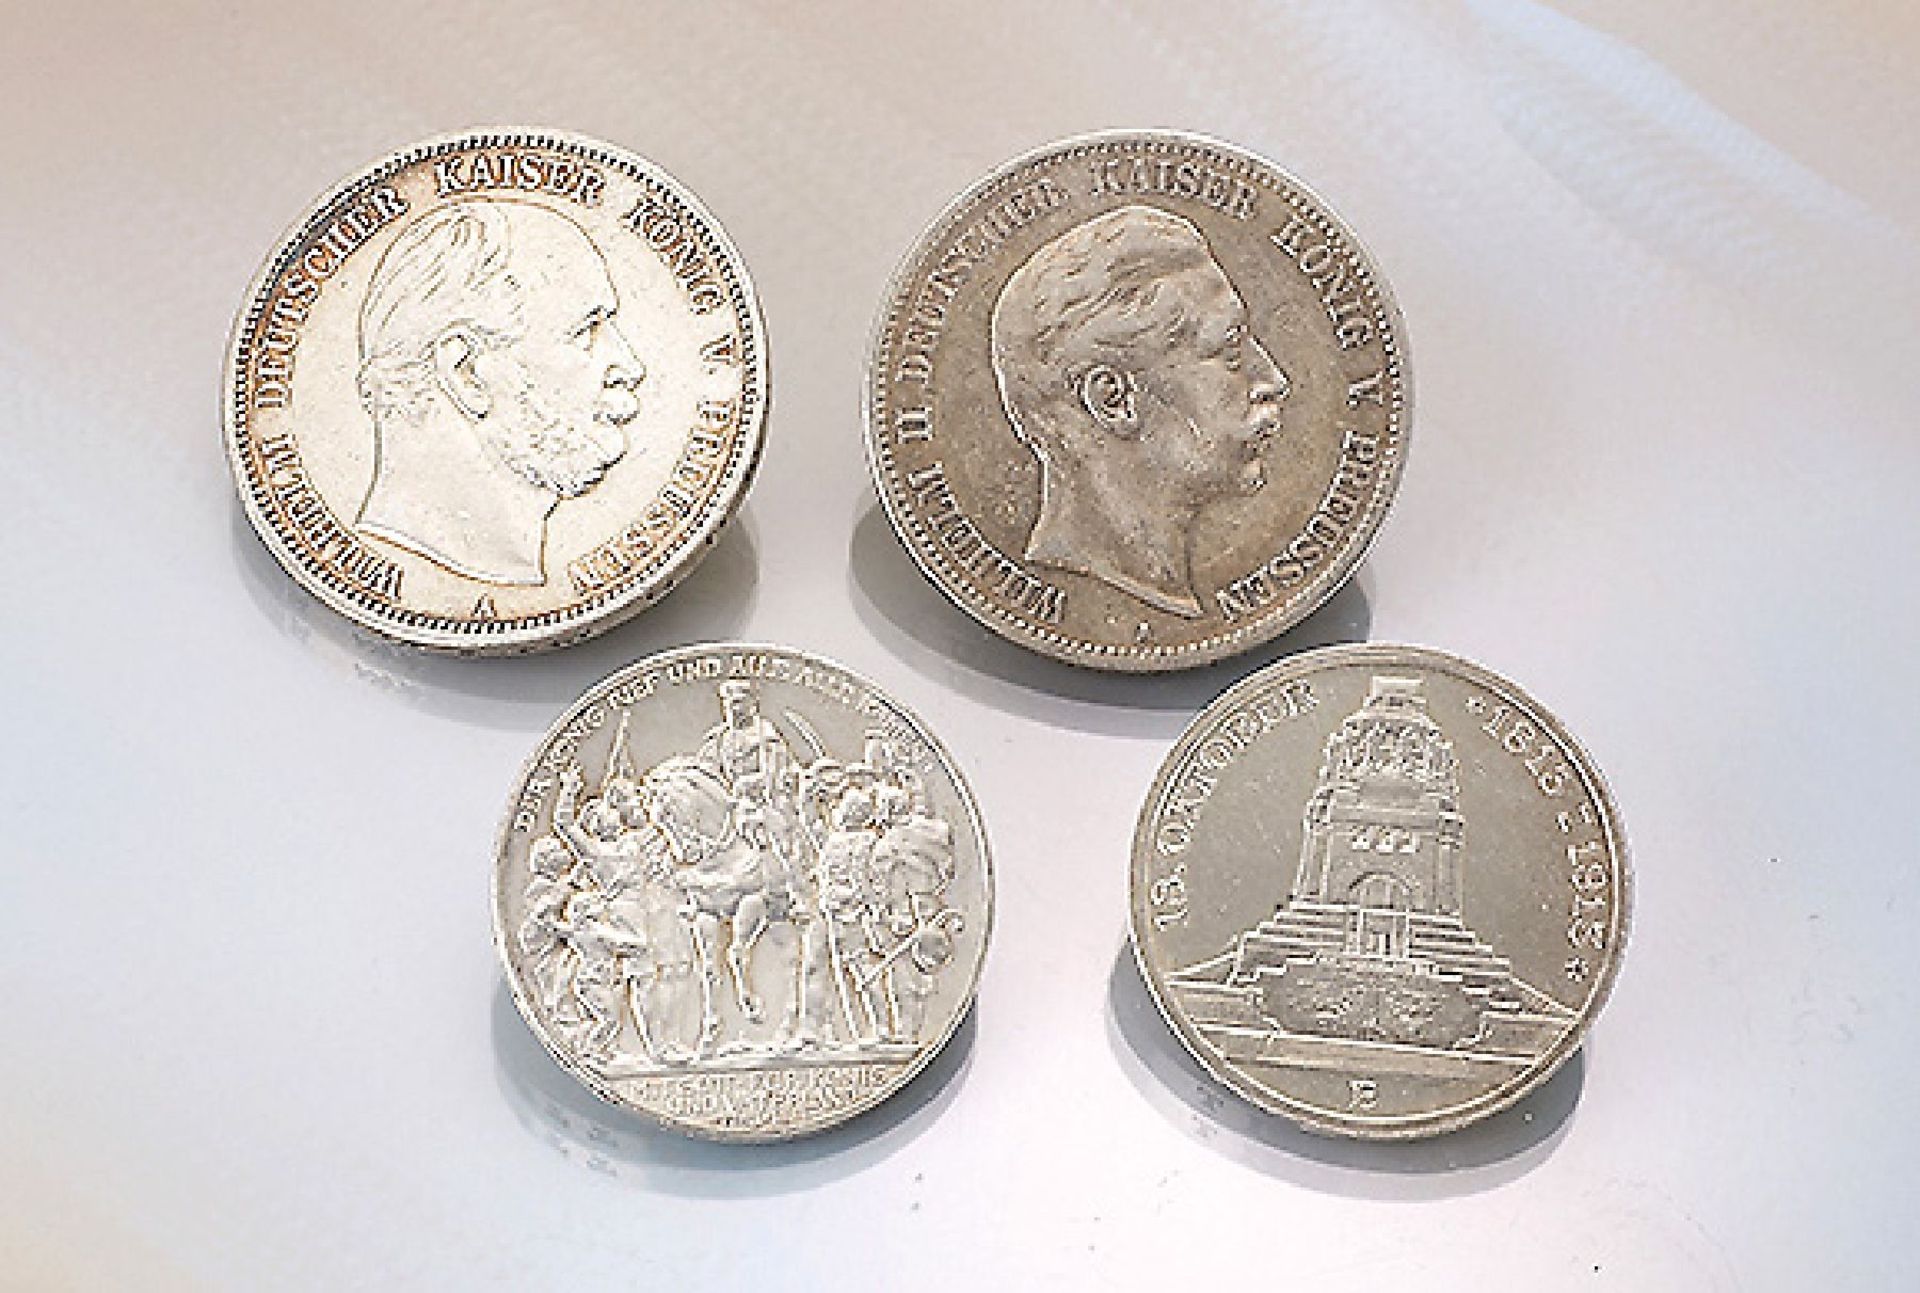 Lot 26 silver coins Prussia , 2 Mark 1876, 1901, 1903, 1905, 1913; 3 Mark 1908, 2 x 1909,5 x 1910,